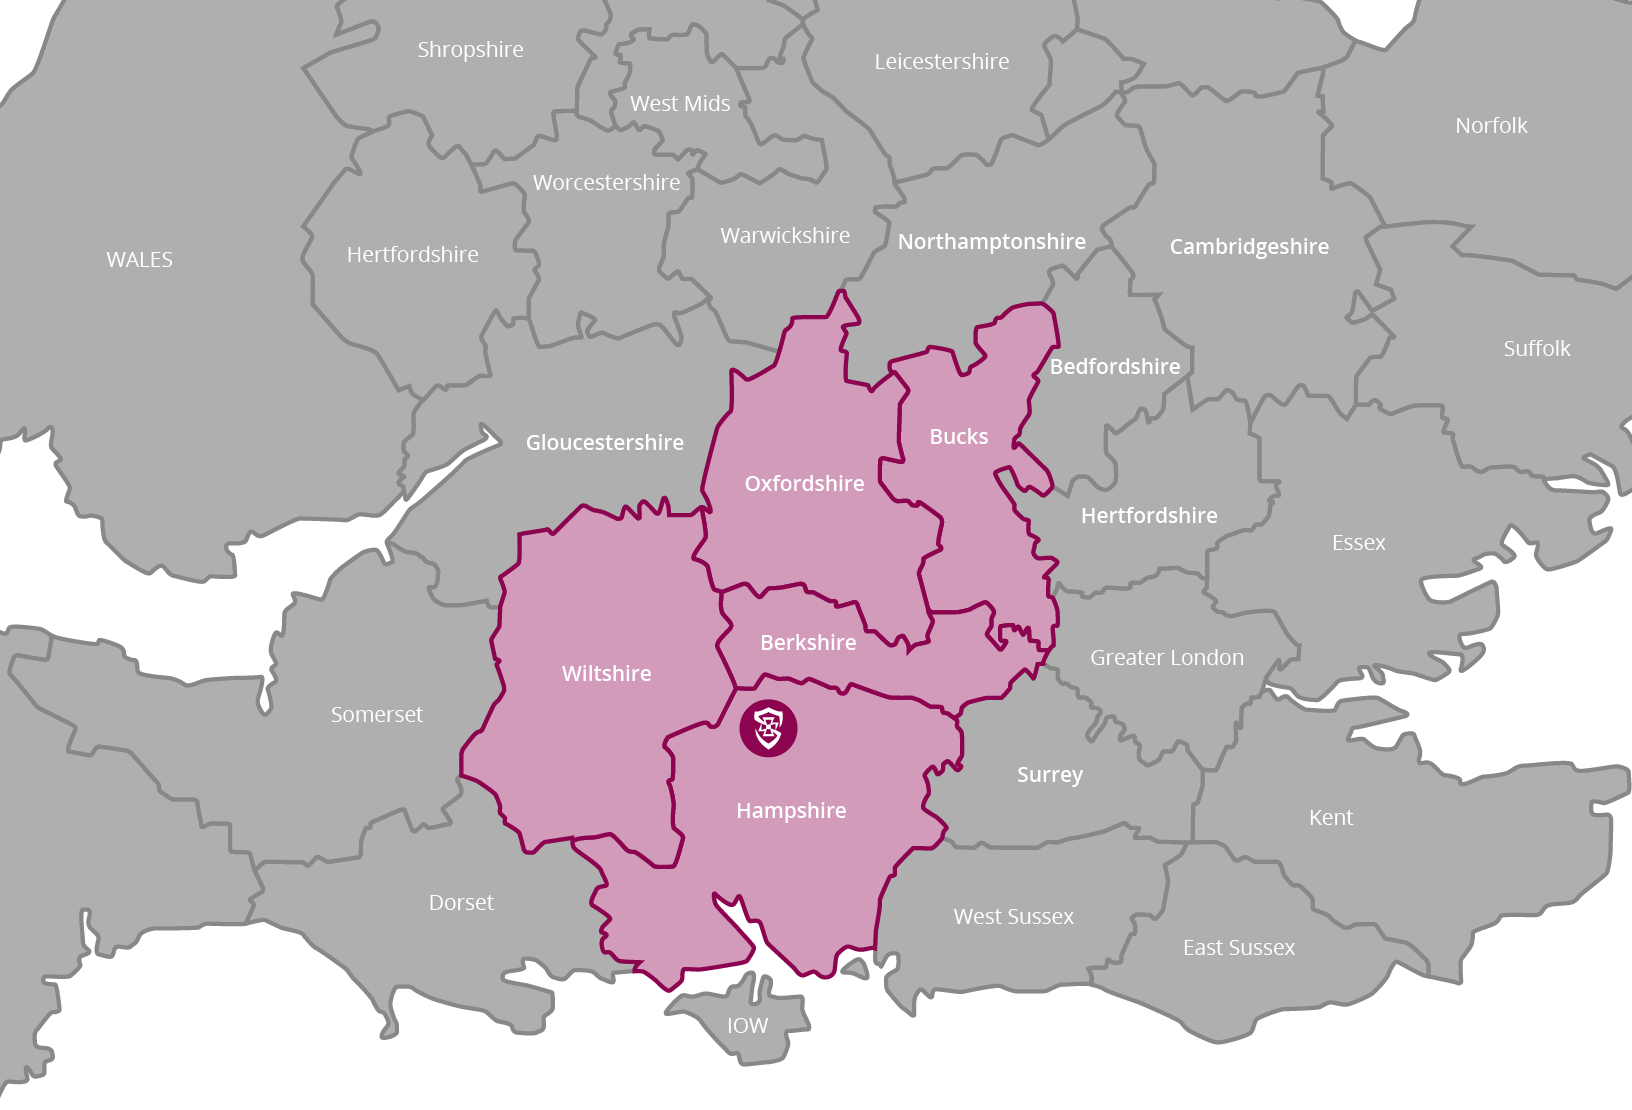 Our areas of operation map showing counties of the U.K